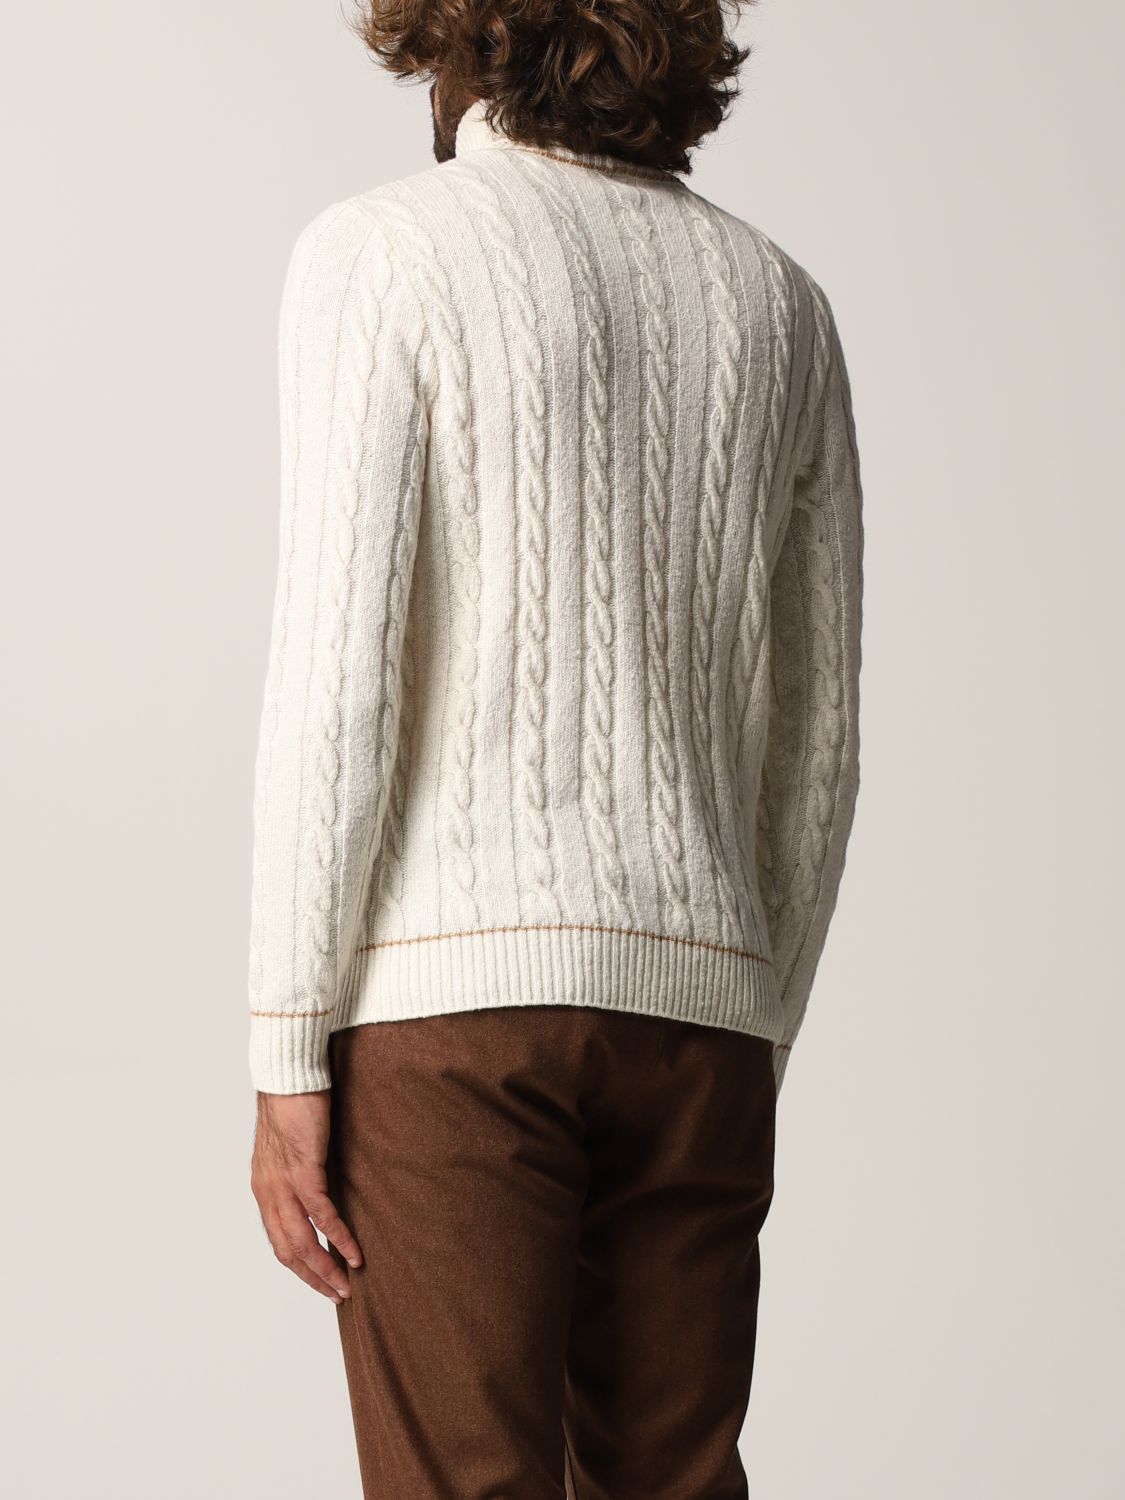 Men's Funnel Neck Sweater Jumper Wool Cable Knit Regular Fit Ivory Ribbed Finish 